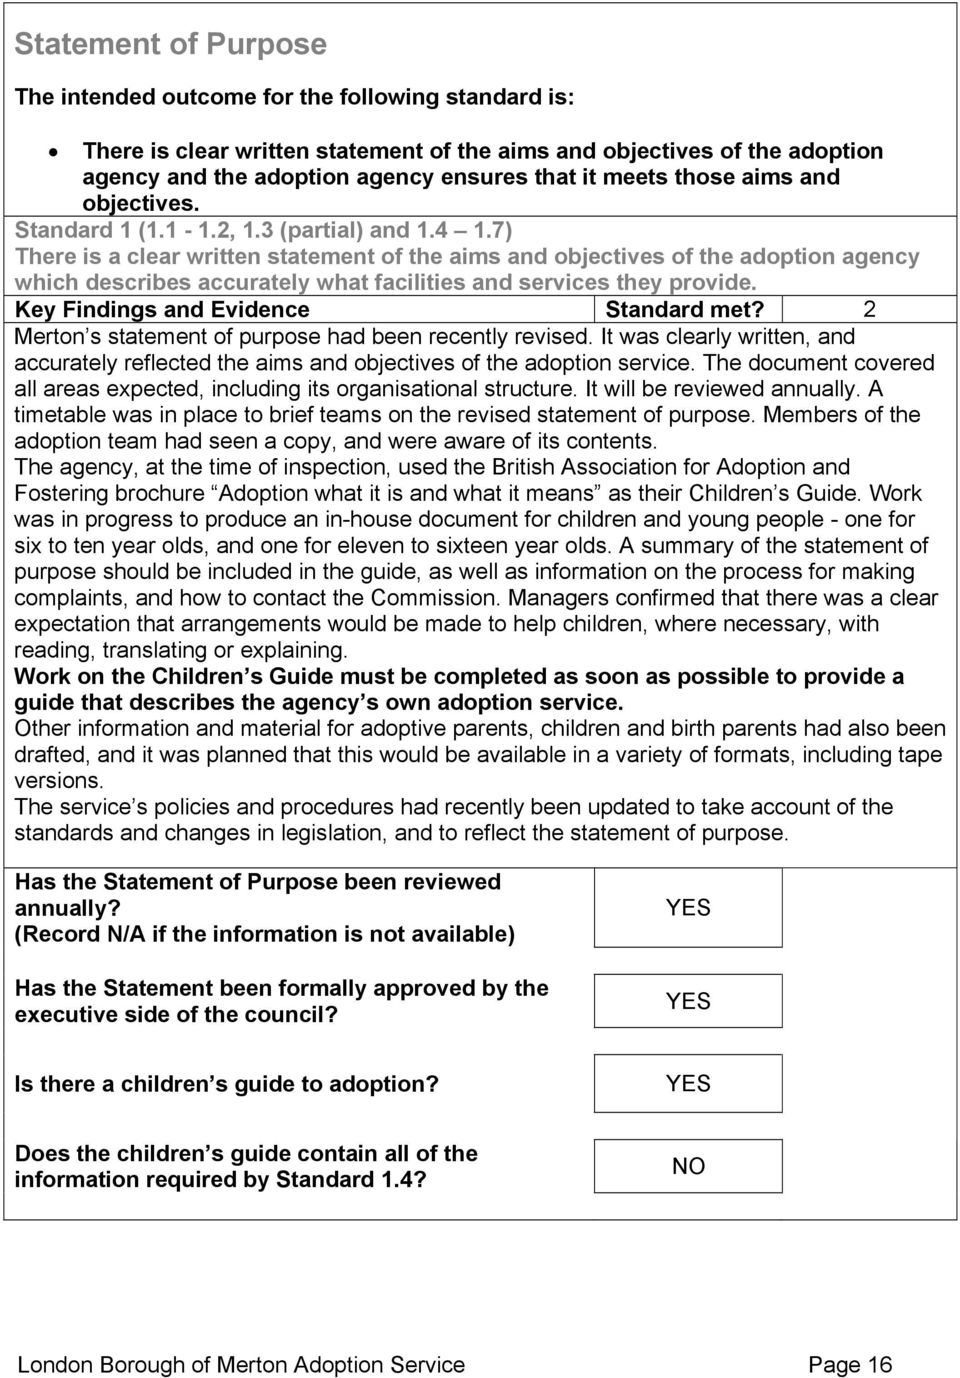 7) There is a clear written statement of the aims and objectives of the adoption agency which describes accurately what facilities and services they provide. Key Findings and Evidence Standard met?